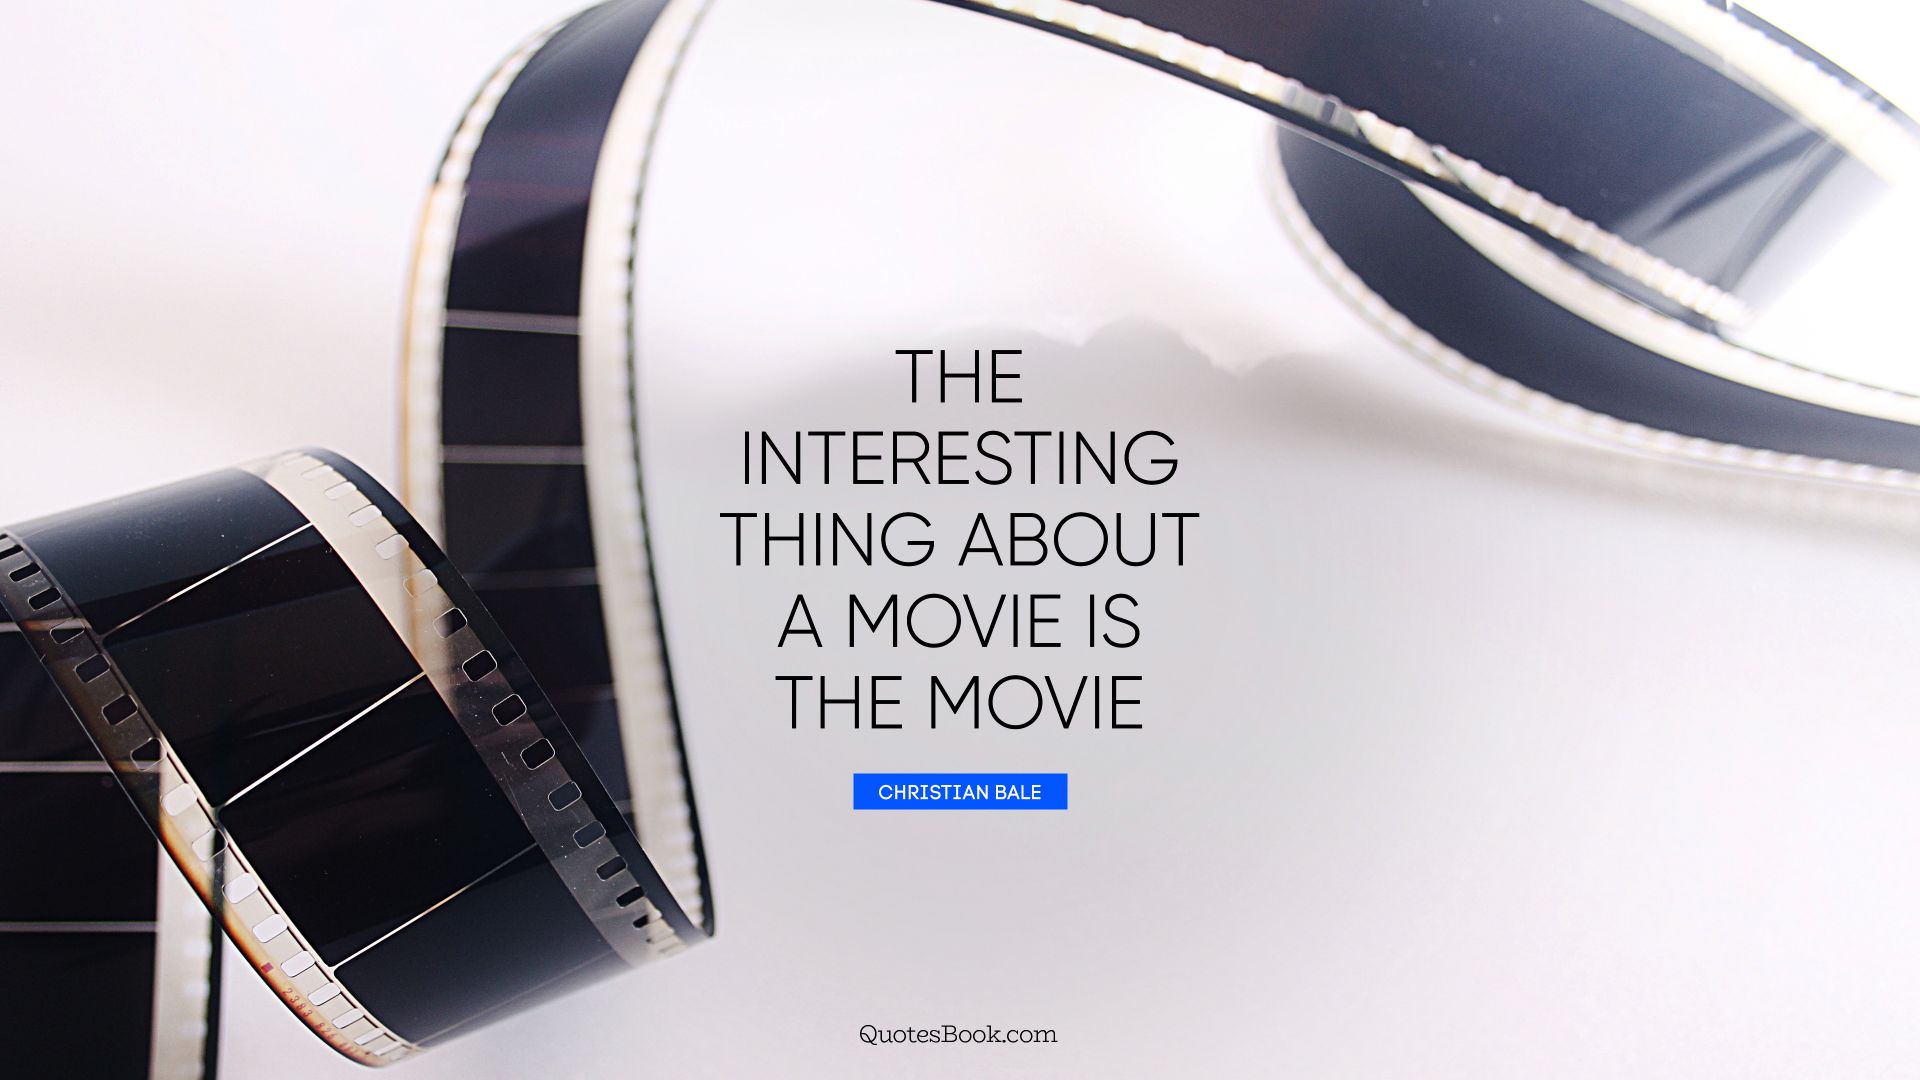 The interesting thing about a movie is the movie. - Quote by Christian Bale